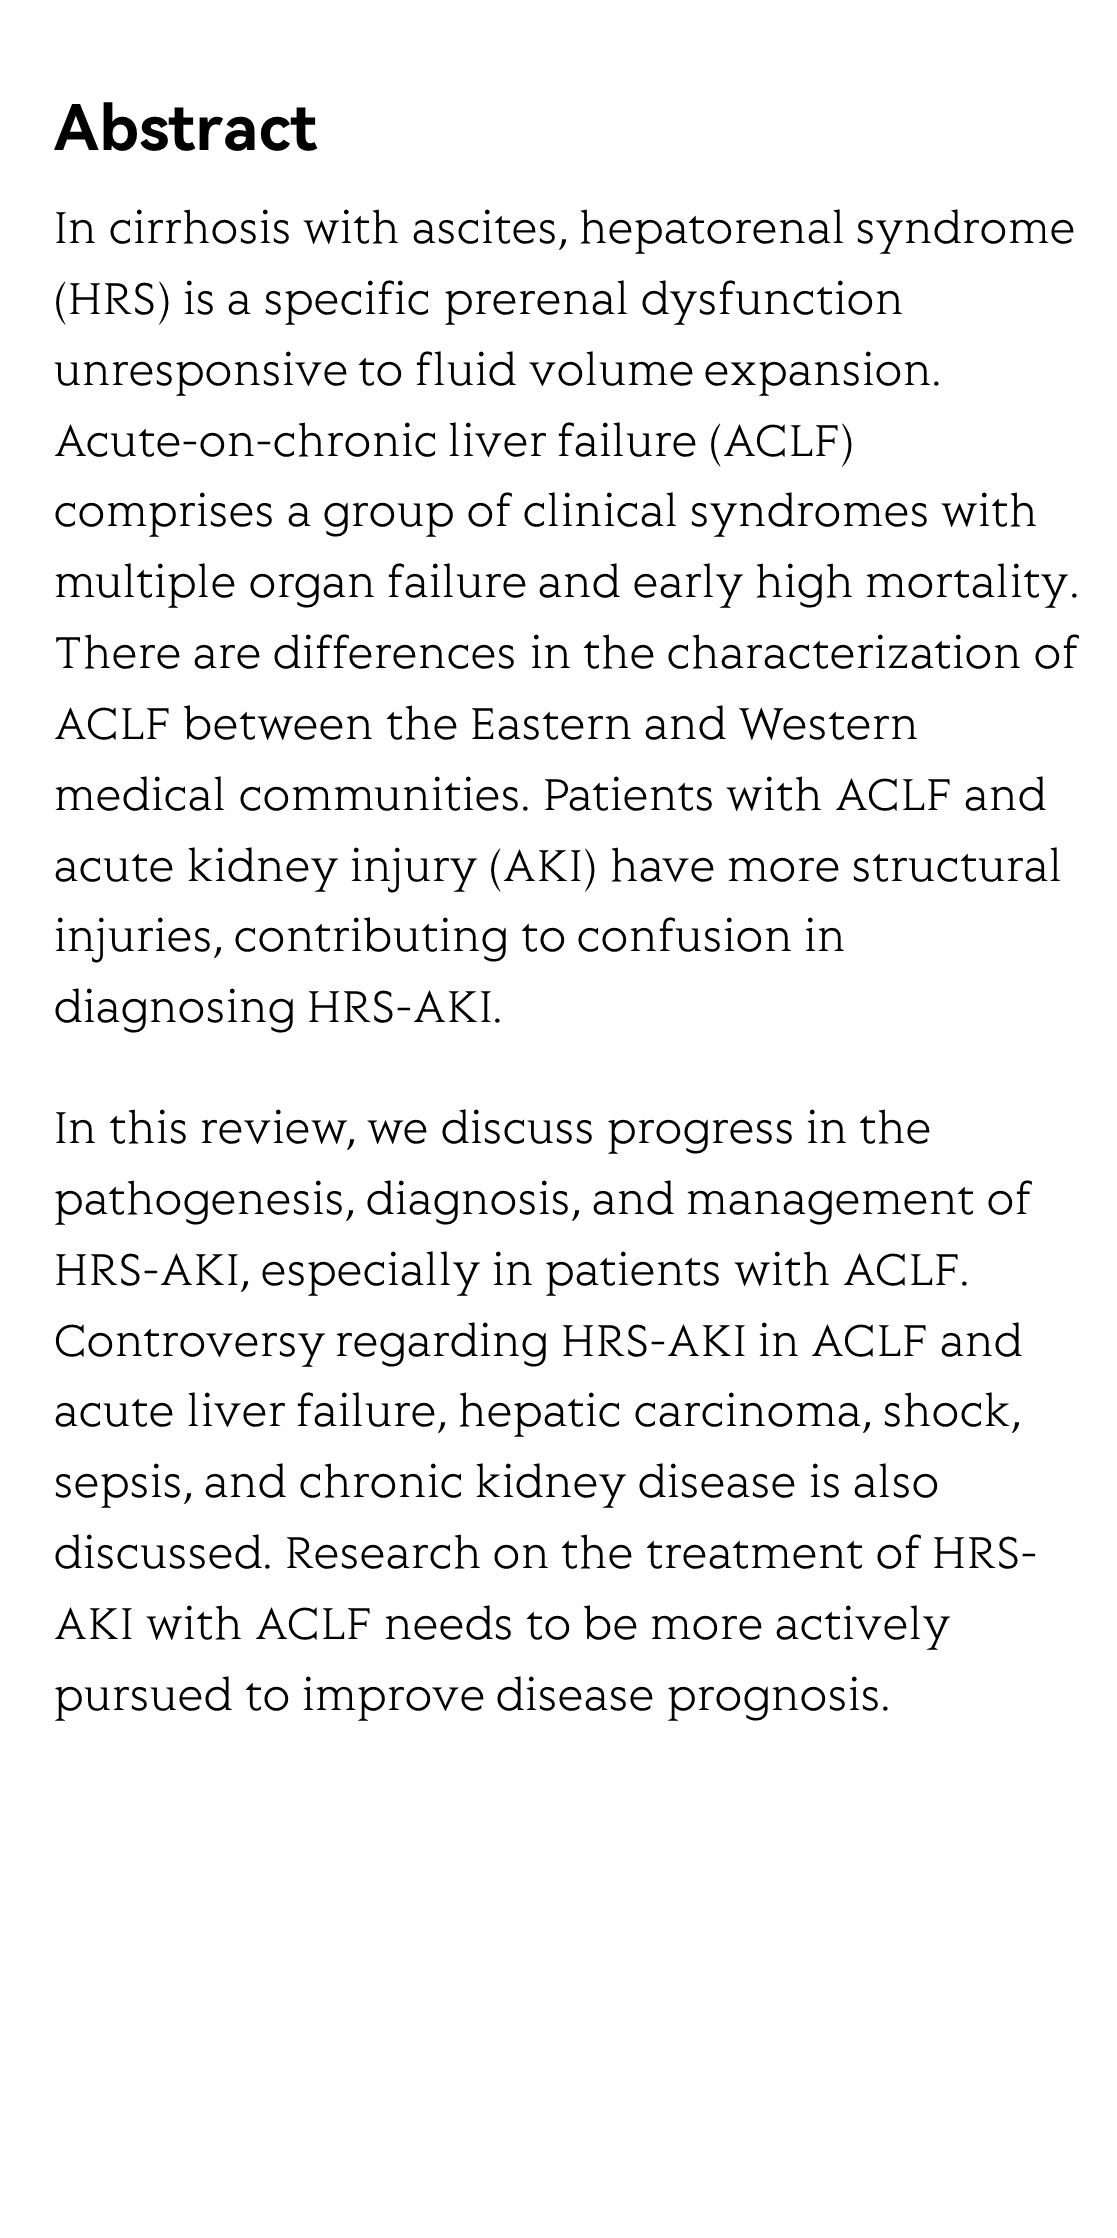 Hepatorenal syndrome in acute-on-chronic liver failure with acute kidney injury: more questions requiring discussion_2